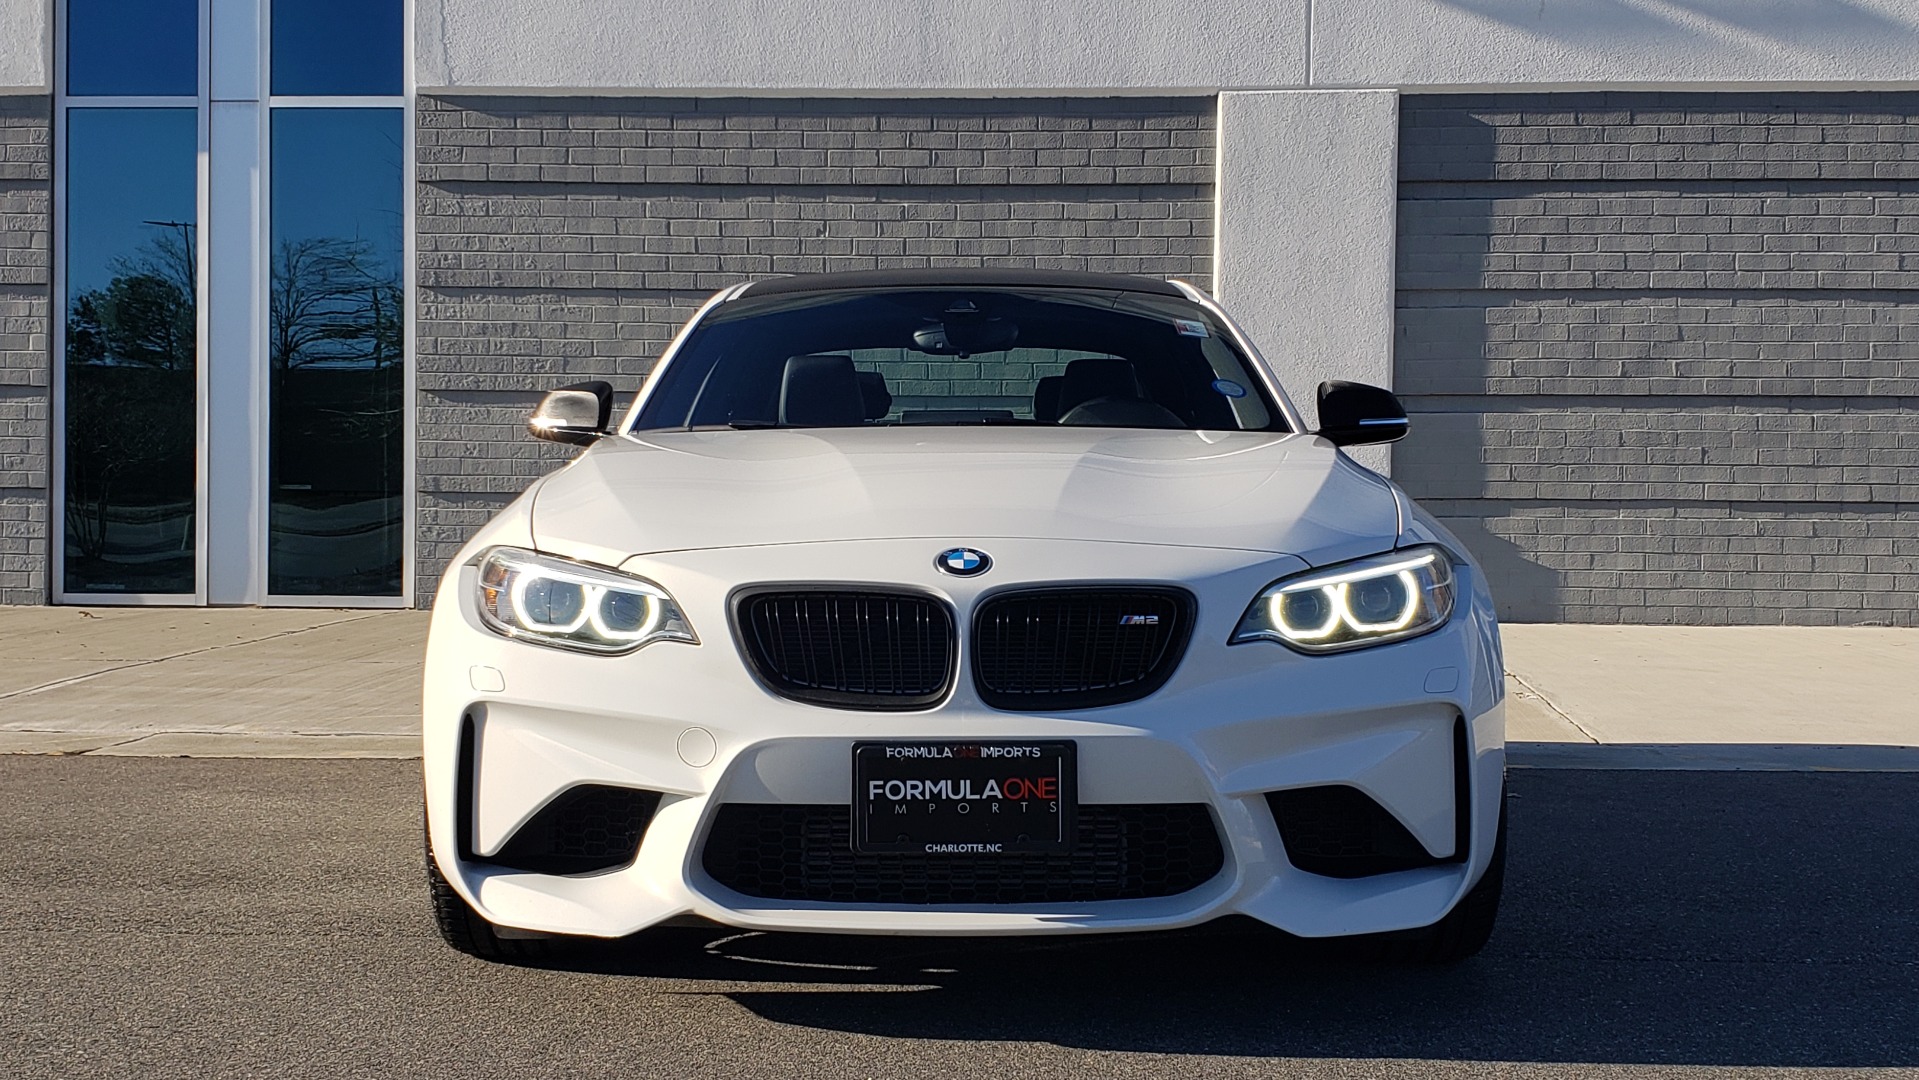 Used 2017 BMW M2 COUPE / MANUAL / EXEC PKG / NAV / WIFI / PDC / REARVIEW for sale Sold at Formula Imports in Charlotte NC 28227 14